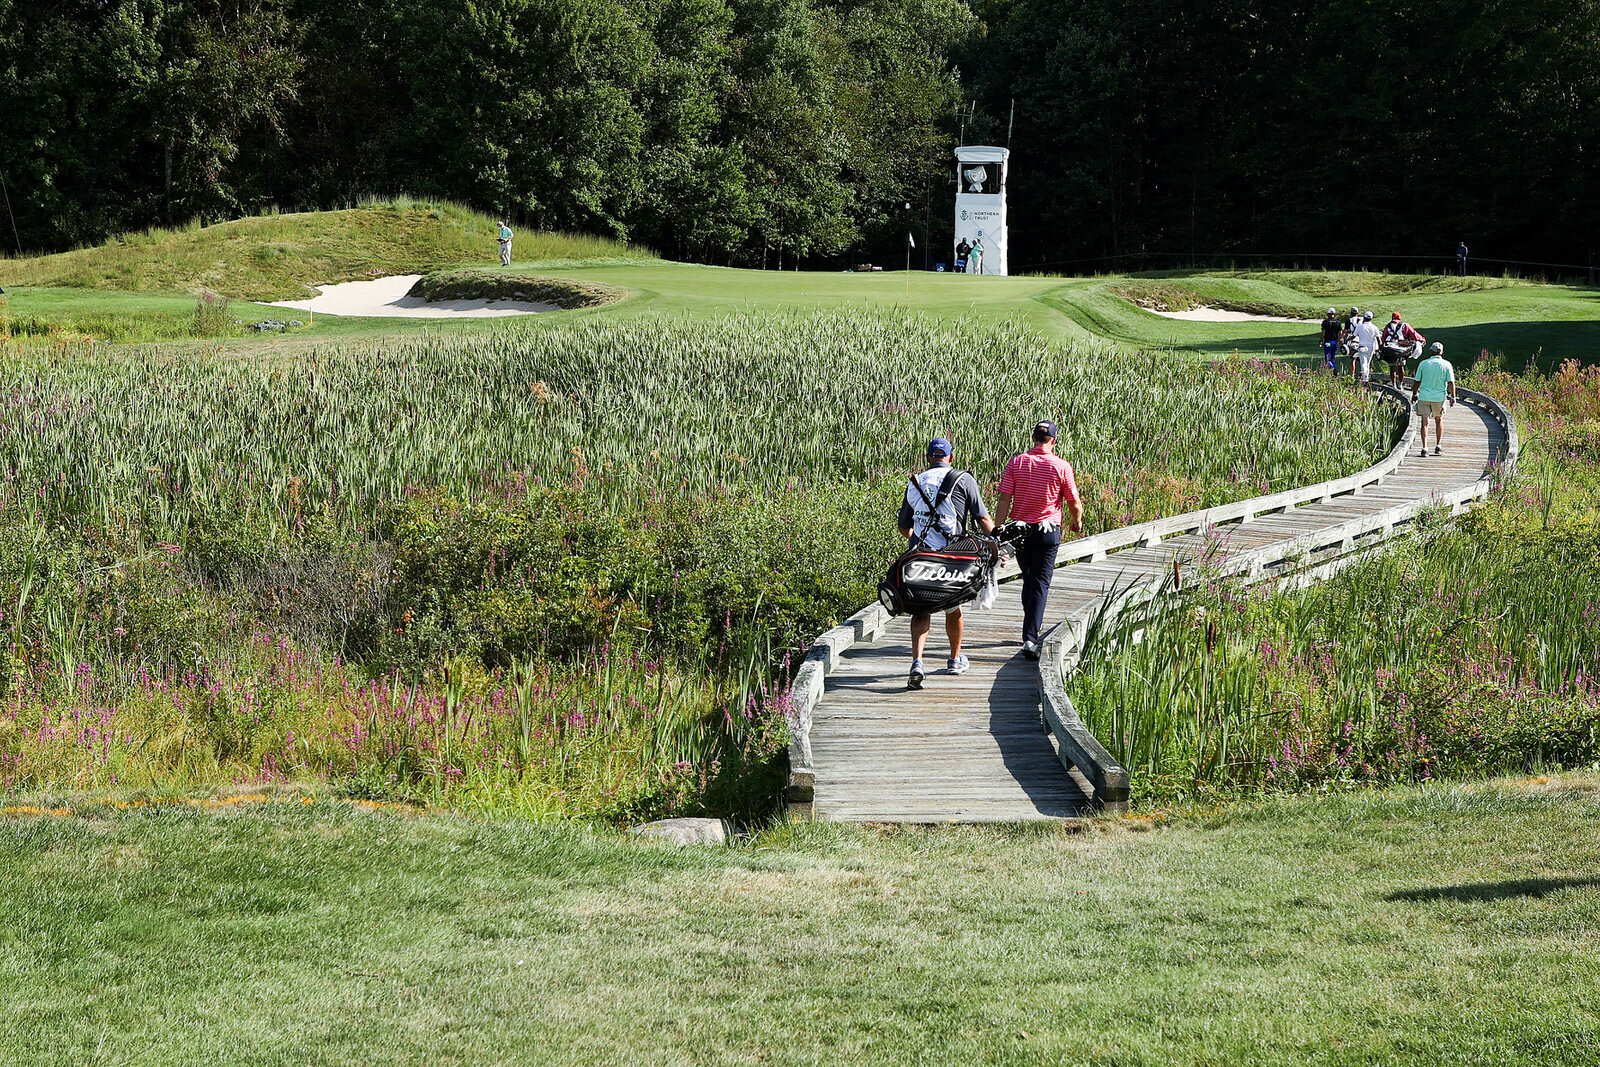  NORTON, MASSACHUSETTS - AUGUST 21: Robby Shelton of the United States, Troy Merritt of the United States and Si Woo Kim of South Korea cross the bridge to the eighth green with their caddies during the second round of The Northern Trust at TPC Bosto